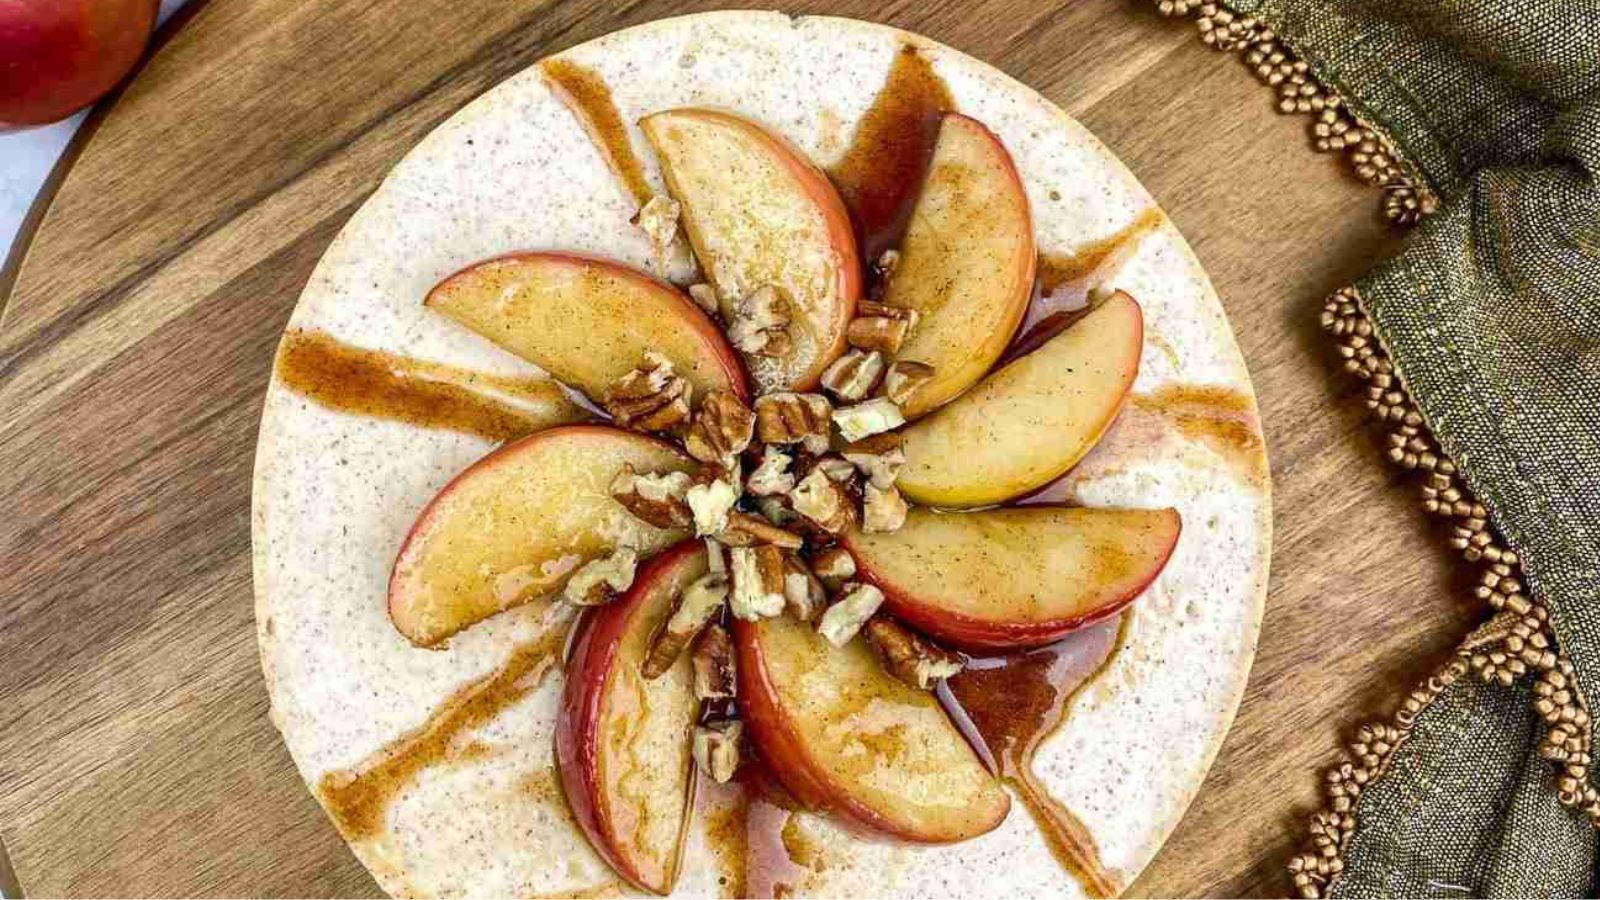 <p>Did you know you can make cheesecake in your Instant Pot? Why yes, you can and they are simple and absolutely delicious. This recipe for Instant Pot Apple-Cinnamon Cheesecake is the perfect fall cheesecake to take centerstage on your Thanksgiving dessert menu. It’s spiced perfectly to evoke warm, comforting fall flavors and is absolutely gorgeous.</p><p><strong>Find All Thanksgiving Dessert Recipes here: <a href="https://mypureplants.com/collection-of-the-best-thanksgiving-desserts/">thanksgiving dessert recipe</a></strong></p>